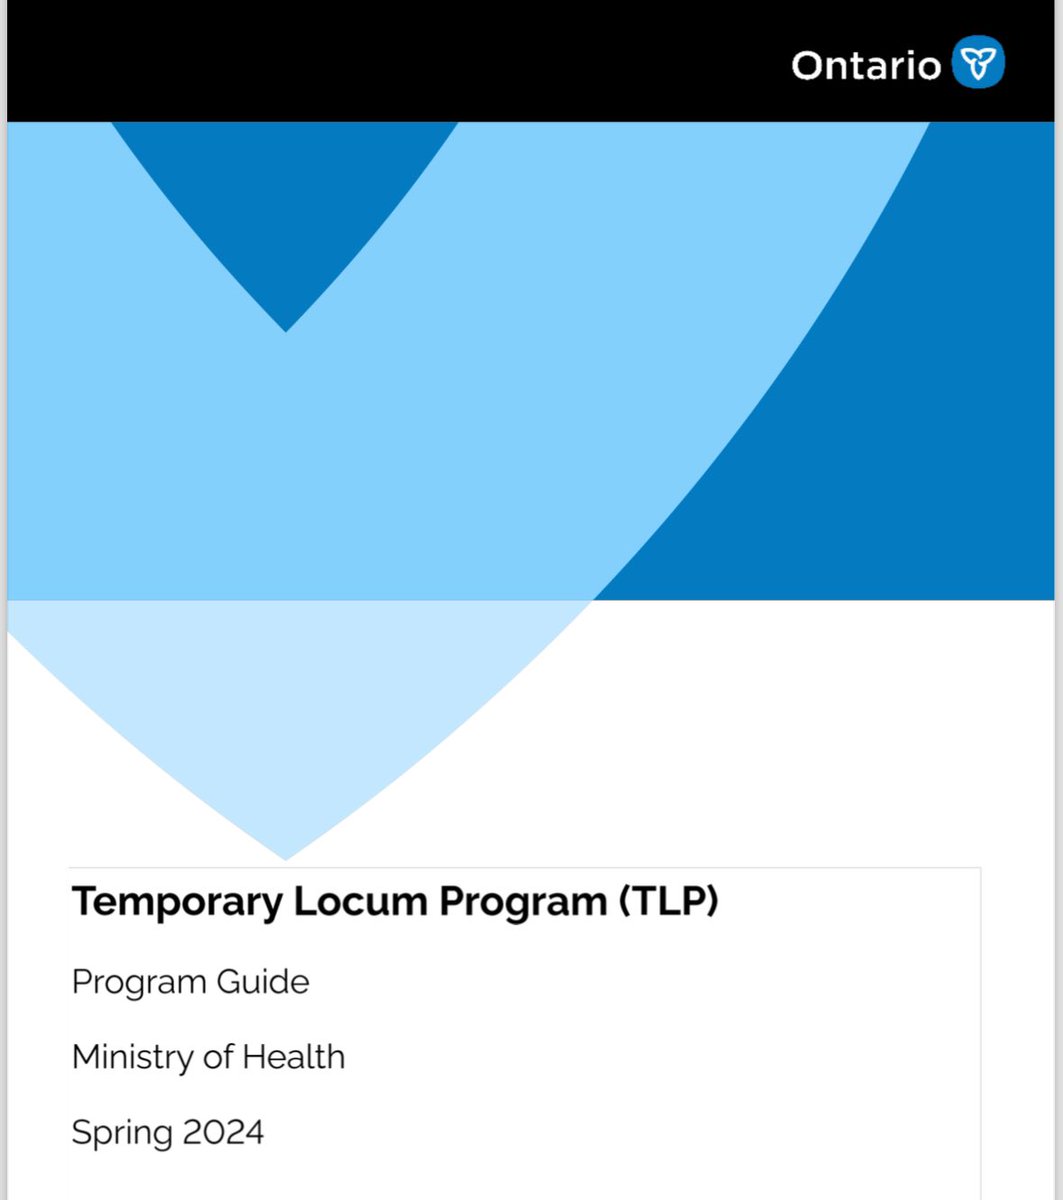 Excellent news for northern/rural ERs: temporary locum program funding has been continued thru Sept 2024. This top-up funding will help incentivize rural ER shifts to stay open, but we also need a long-term plan for northern health. Thank you @OntariosDoctors @OntarioHealthOH